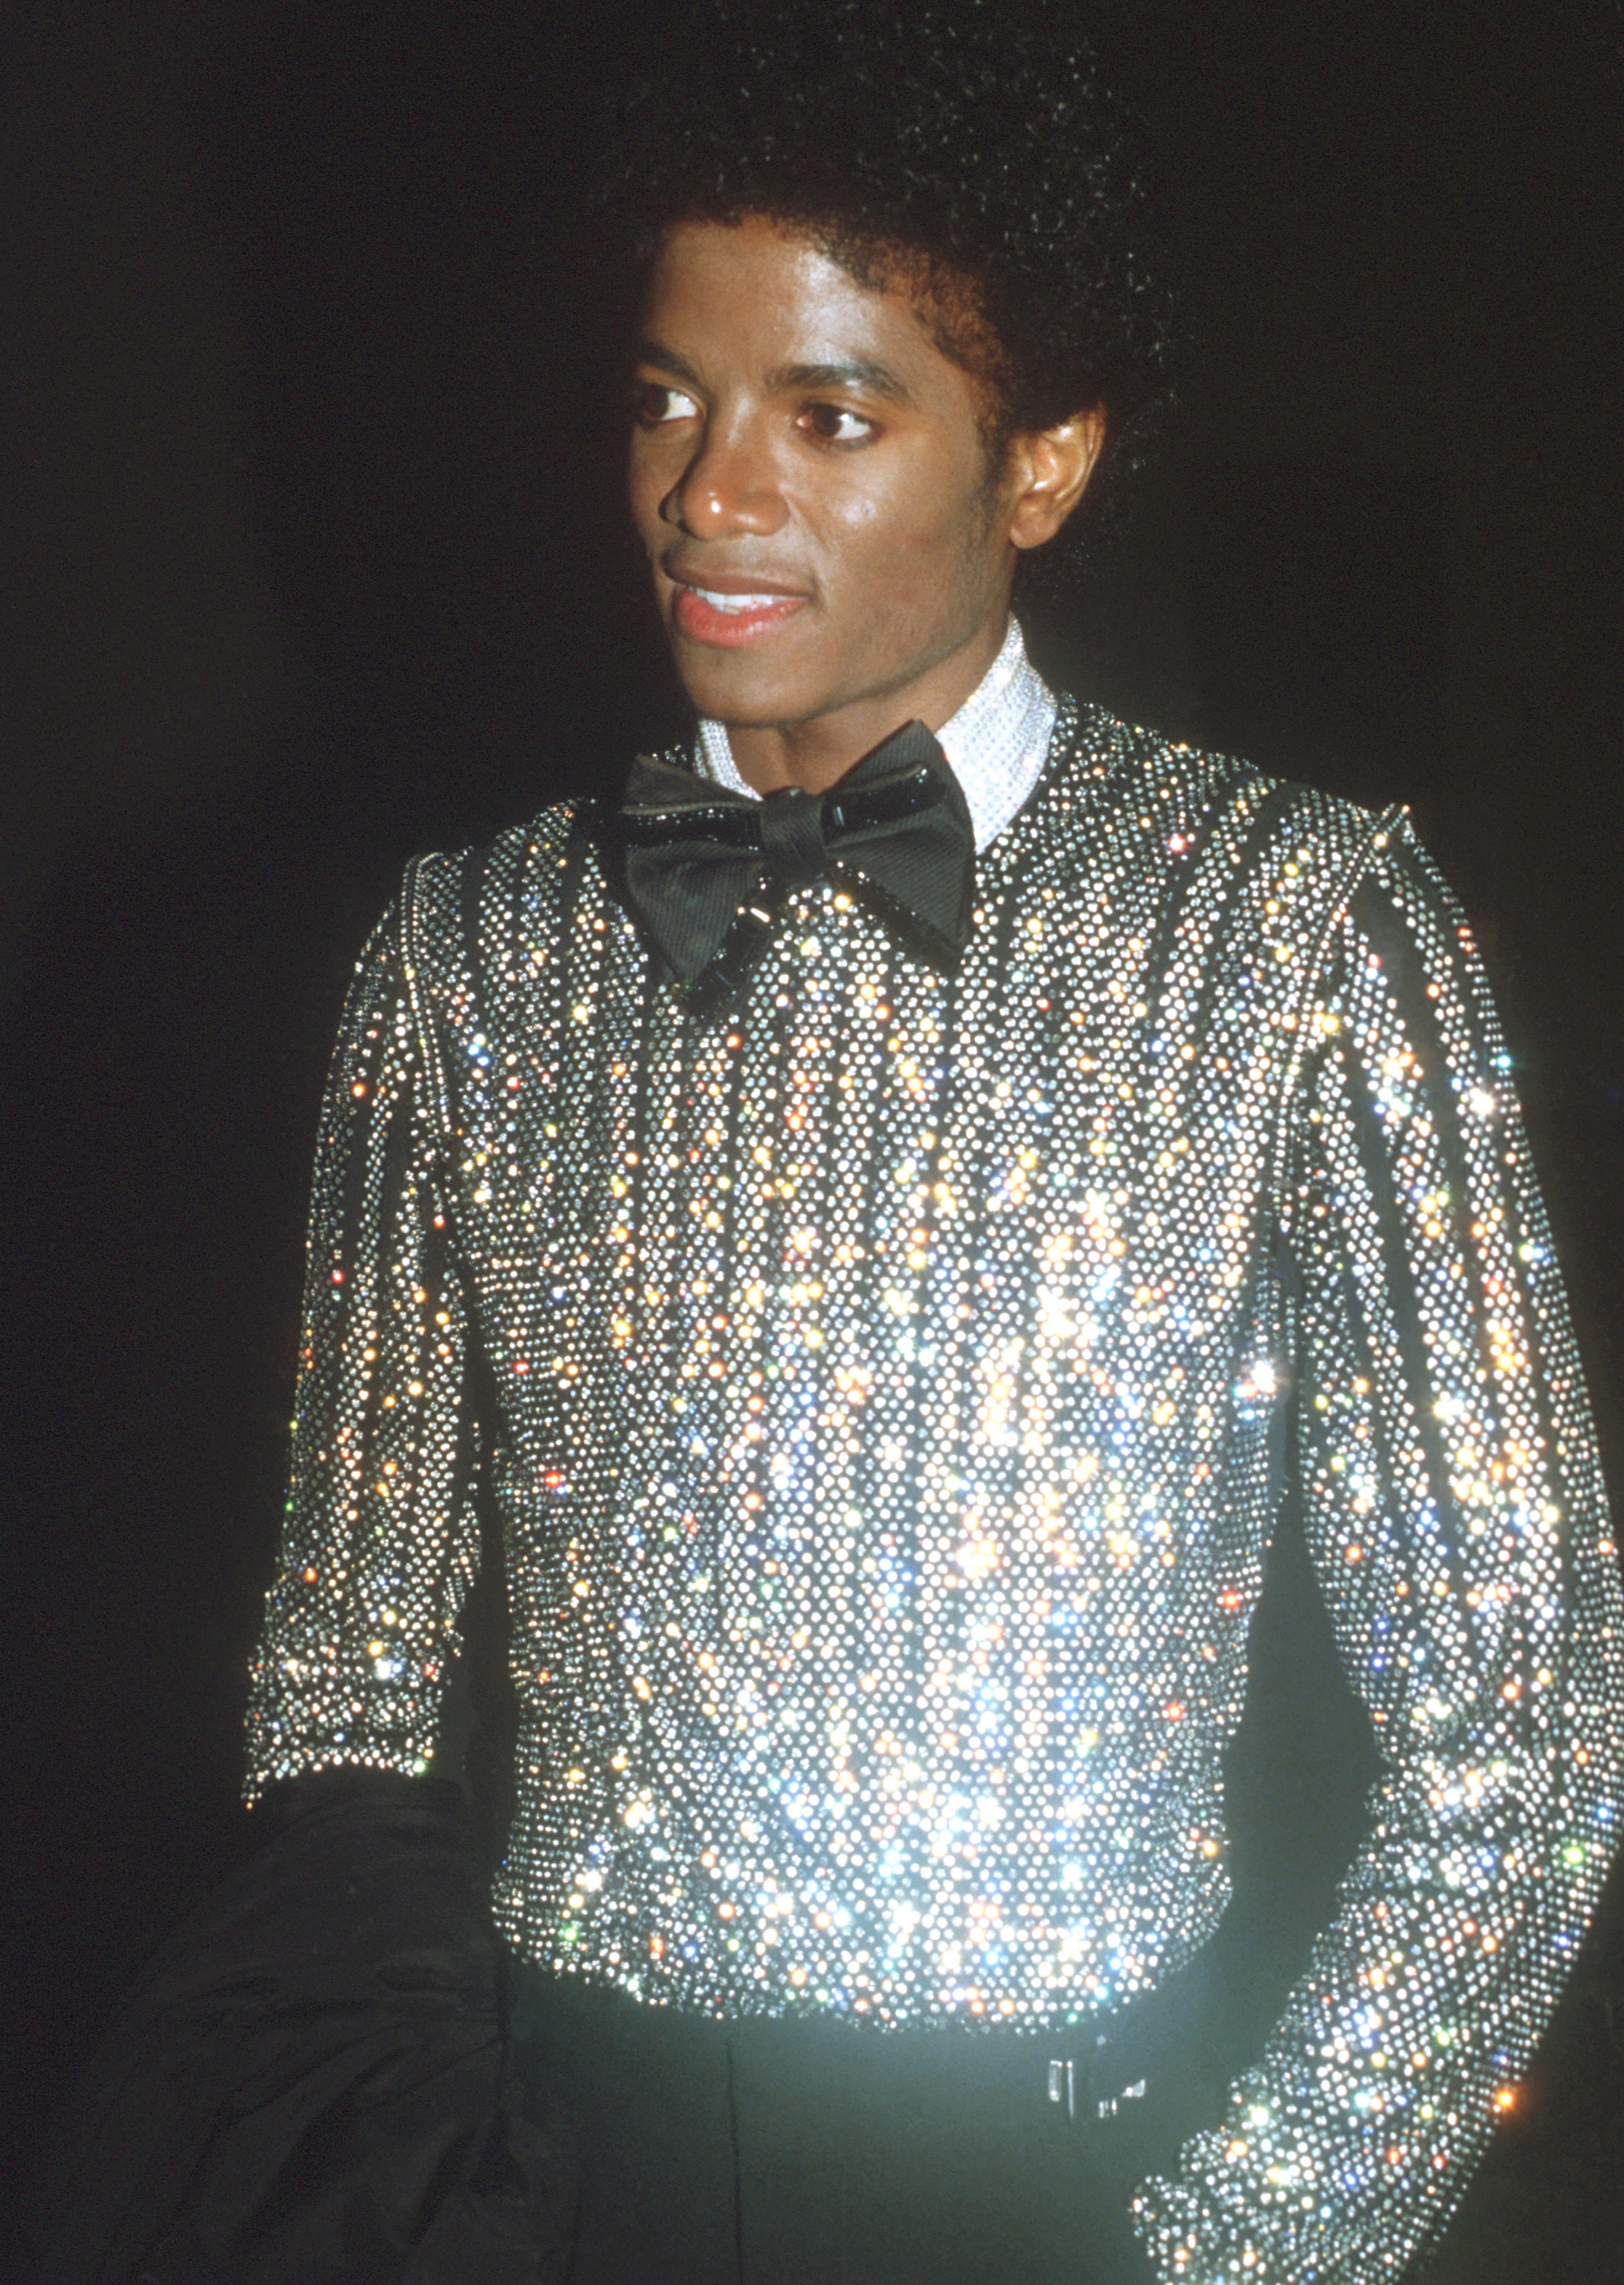 30 Photos That Prove Michael Jackson's Style Was the Epitome of Cool
